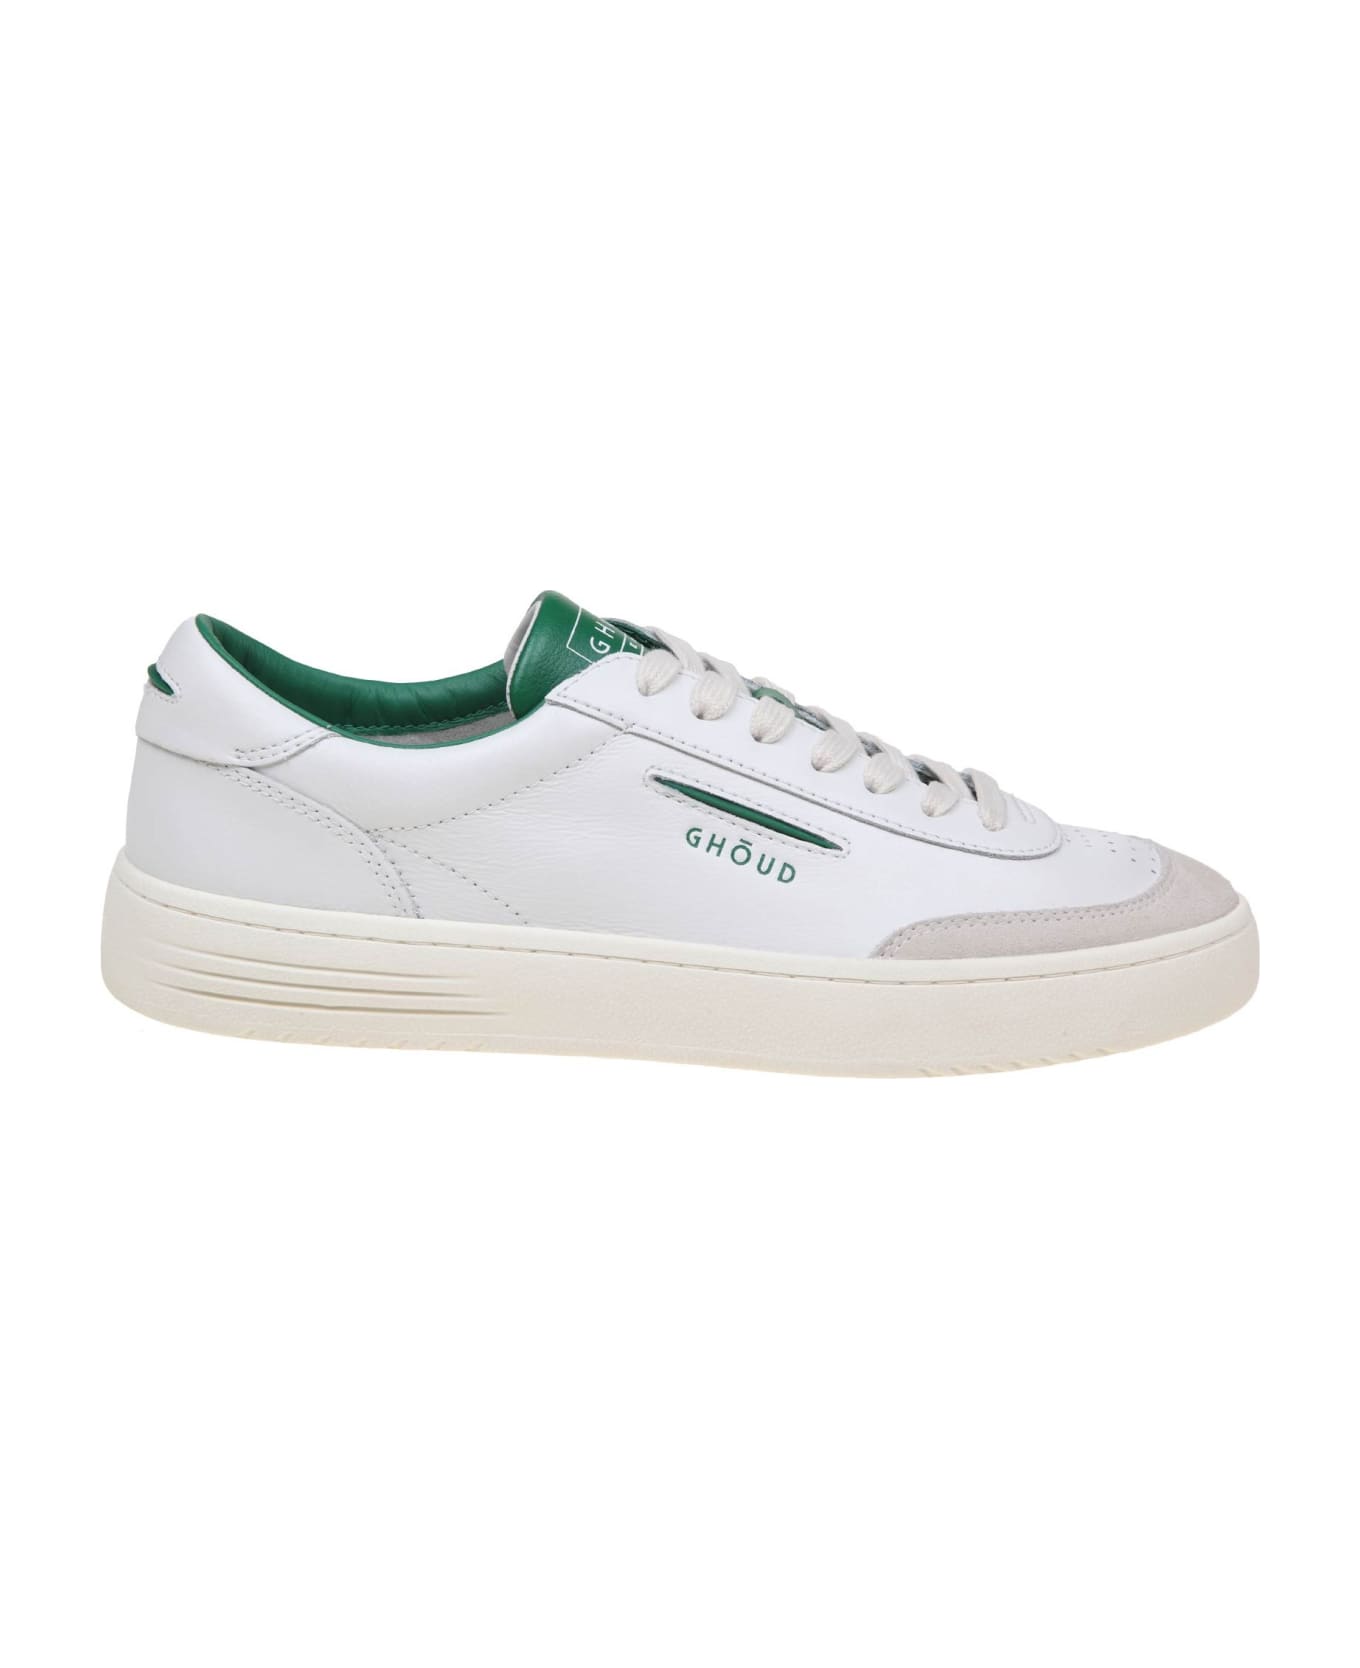 GHOUD Lido Low Sneakers In White/green Leather And Suede - Green スニーカー